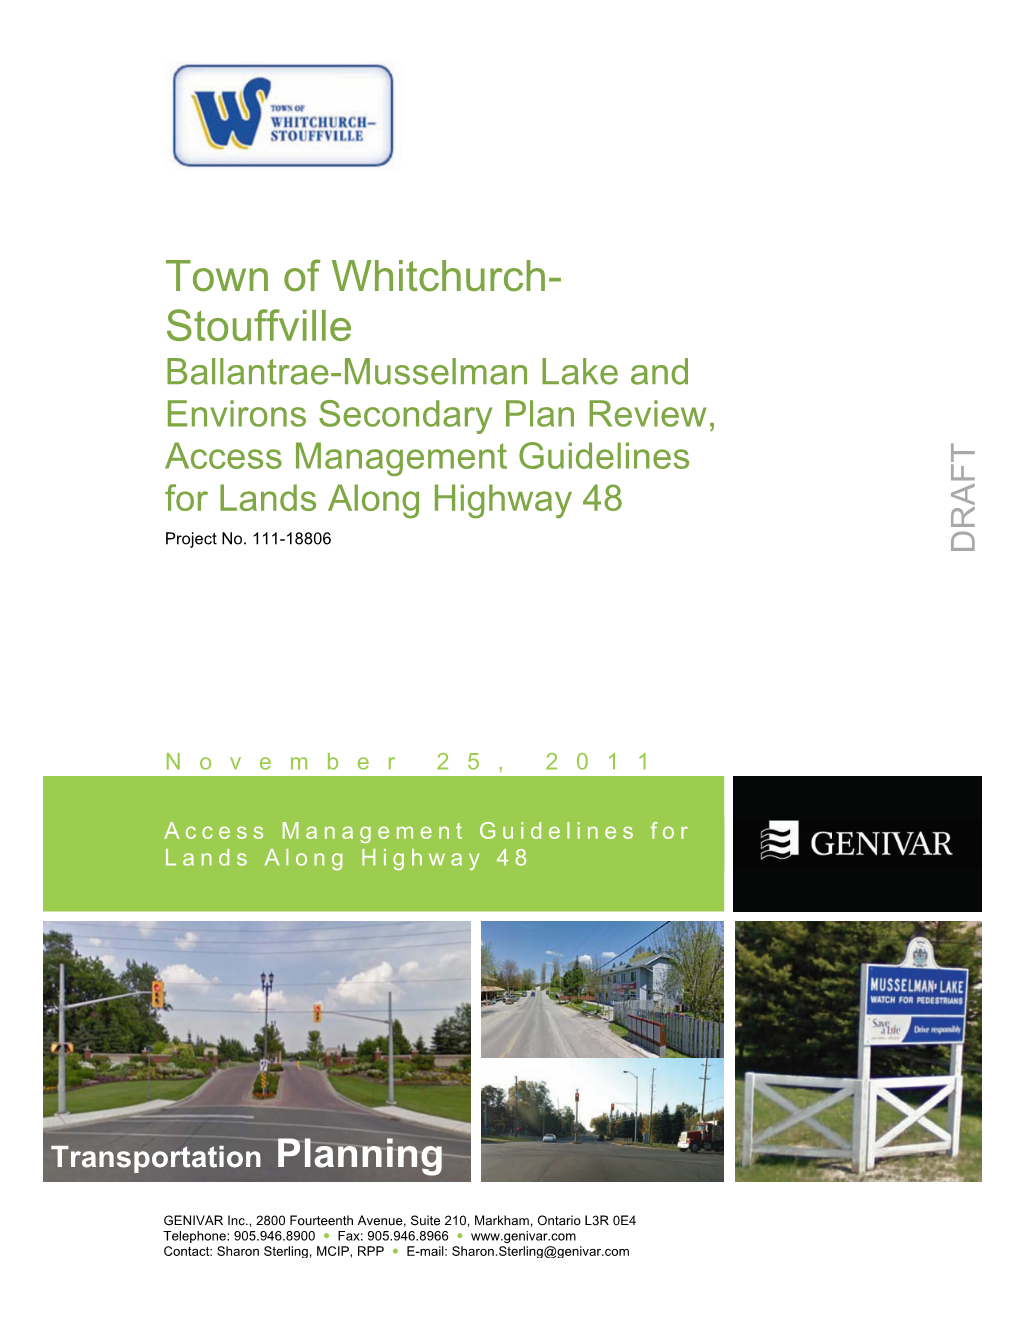 Town of Whitchurch- Stouffville Ballantrae-Musselman Lake and Environs Secondary Plan Review, Access Management Guidelines for Lands Along Highway 48 Project No